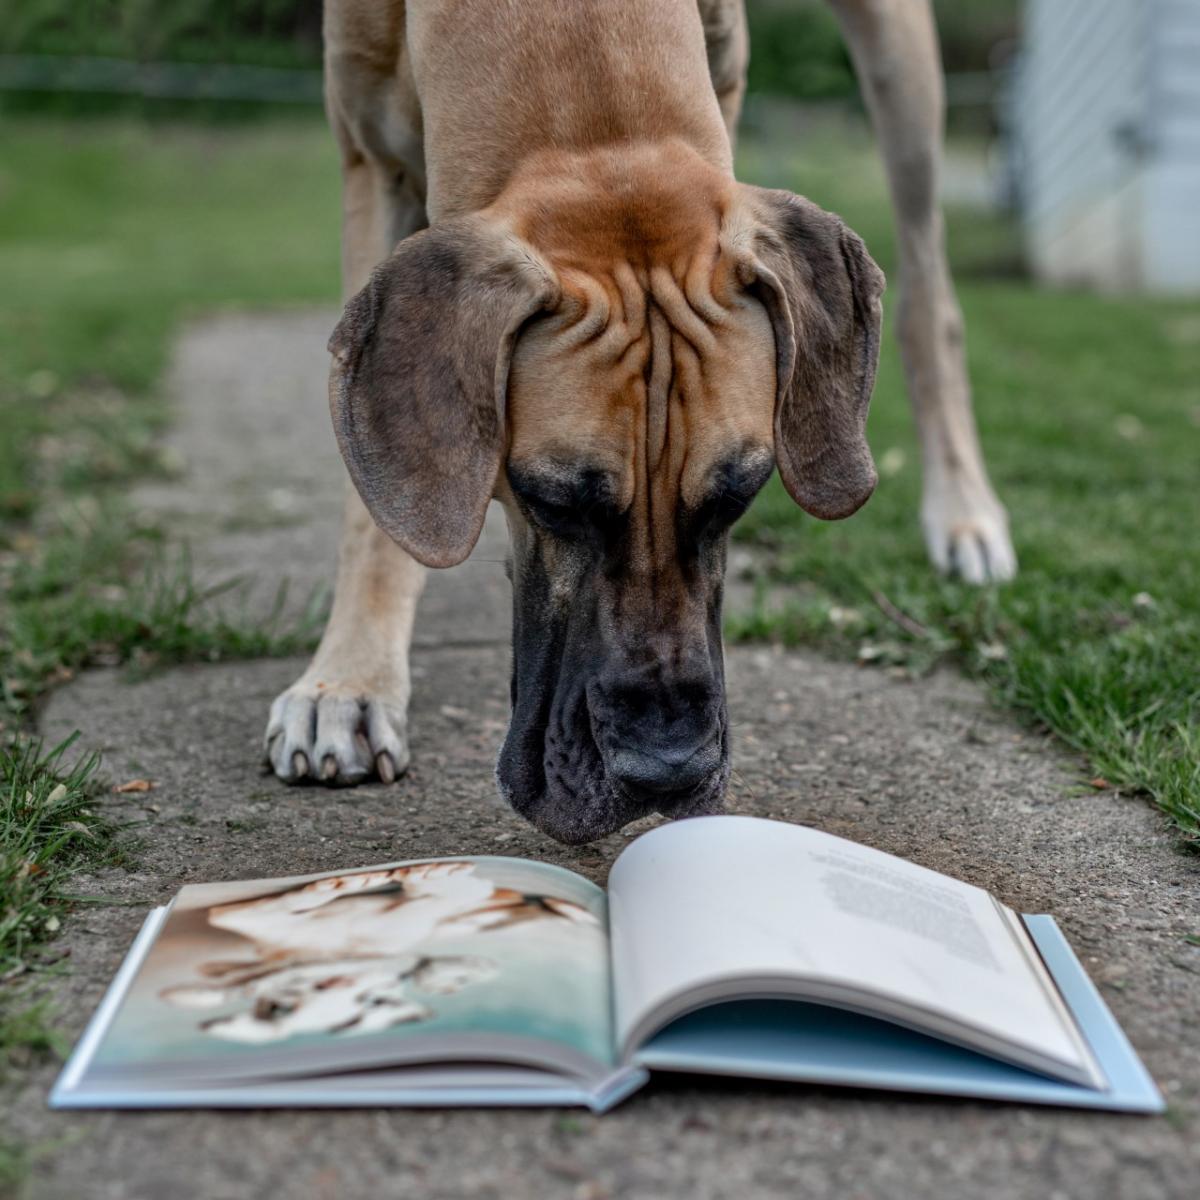 Grey the Great Dane is looking down at an open book on a sidewalk